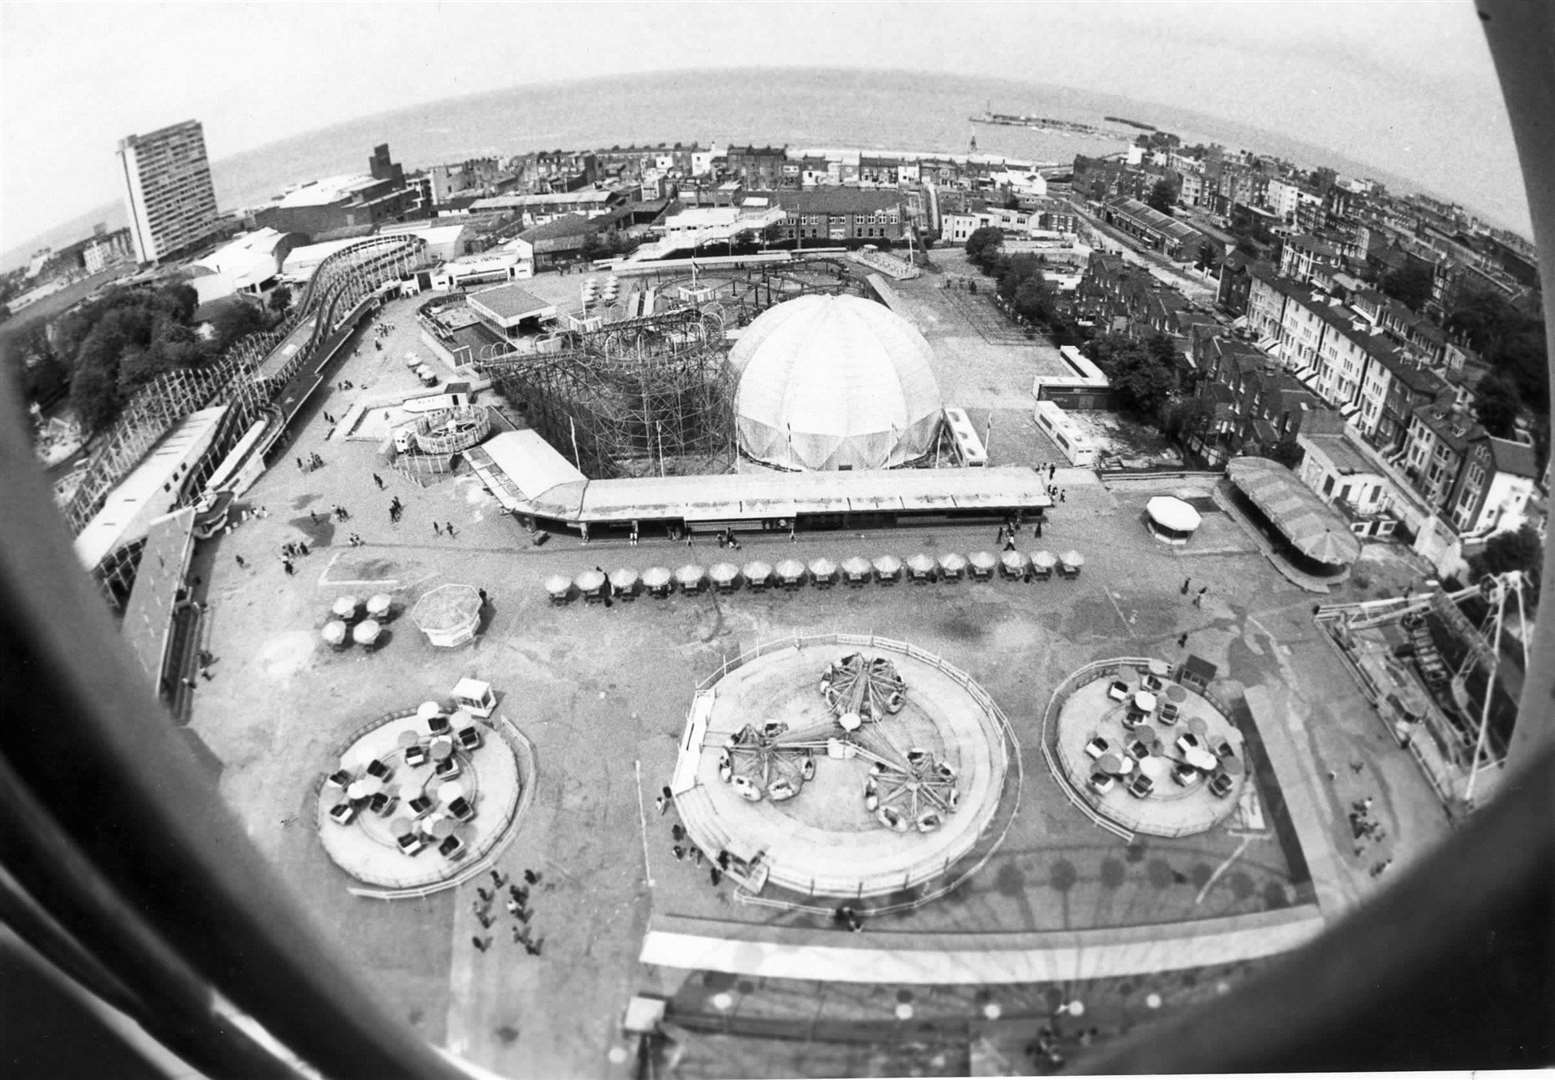 The Margate theme park in 1983 hosted a range of white-knuckle rides